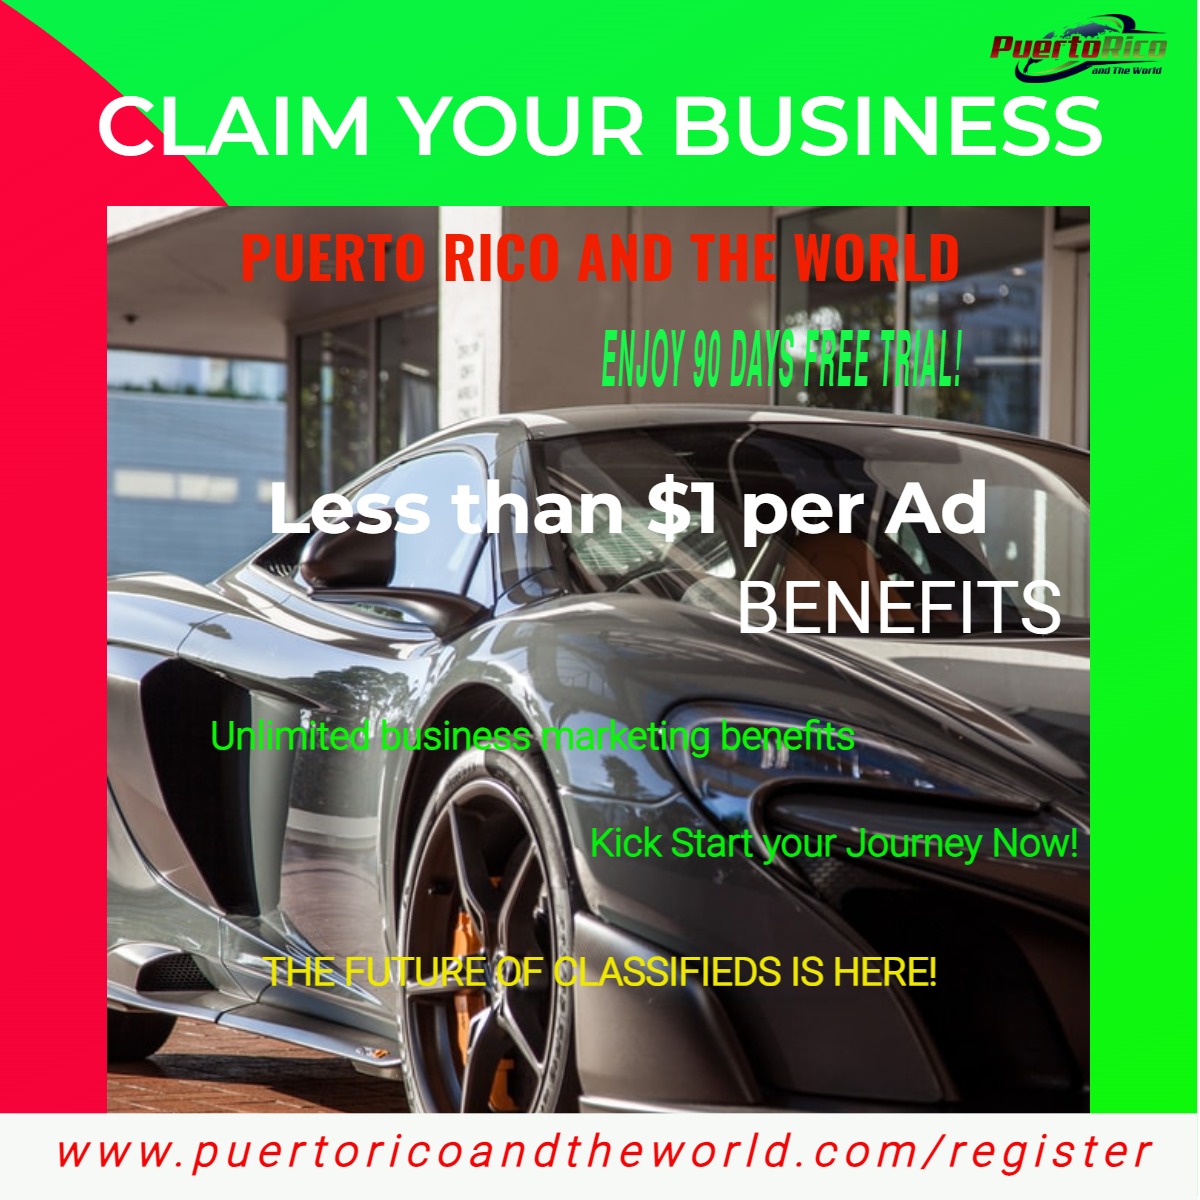 Let Puerto Rico and The World be your platform.
Claim your profile in a quick 3-step process and strengthen your business presence.
📷puertoricoandtheworld.com/register
#businessgrowth #businesslisting #marketing #advertisement #classifiedads #addyourbusiness #growyourbusiness